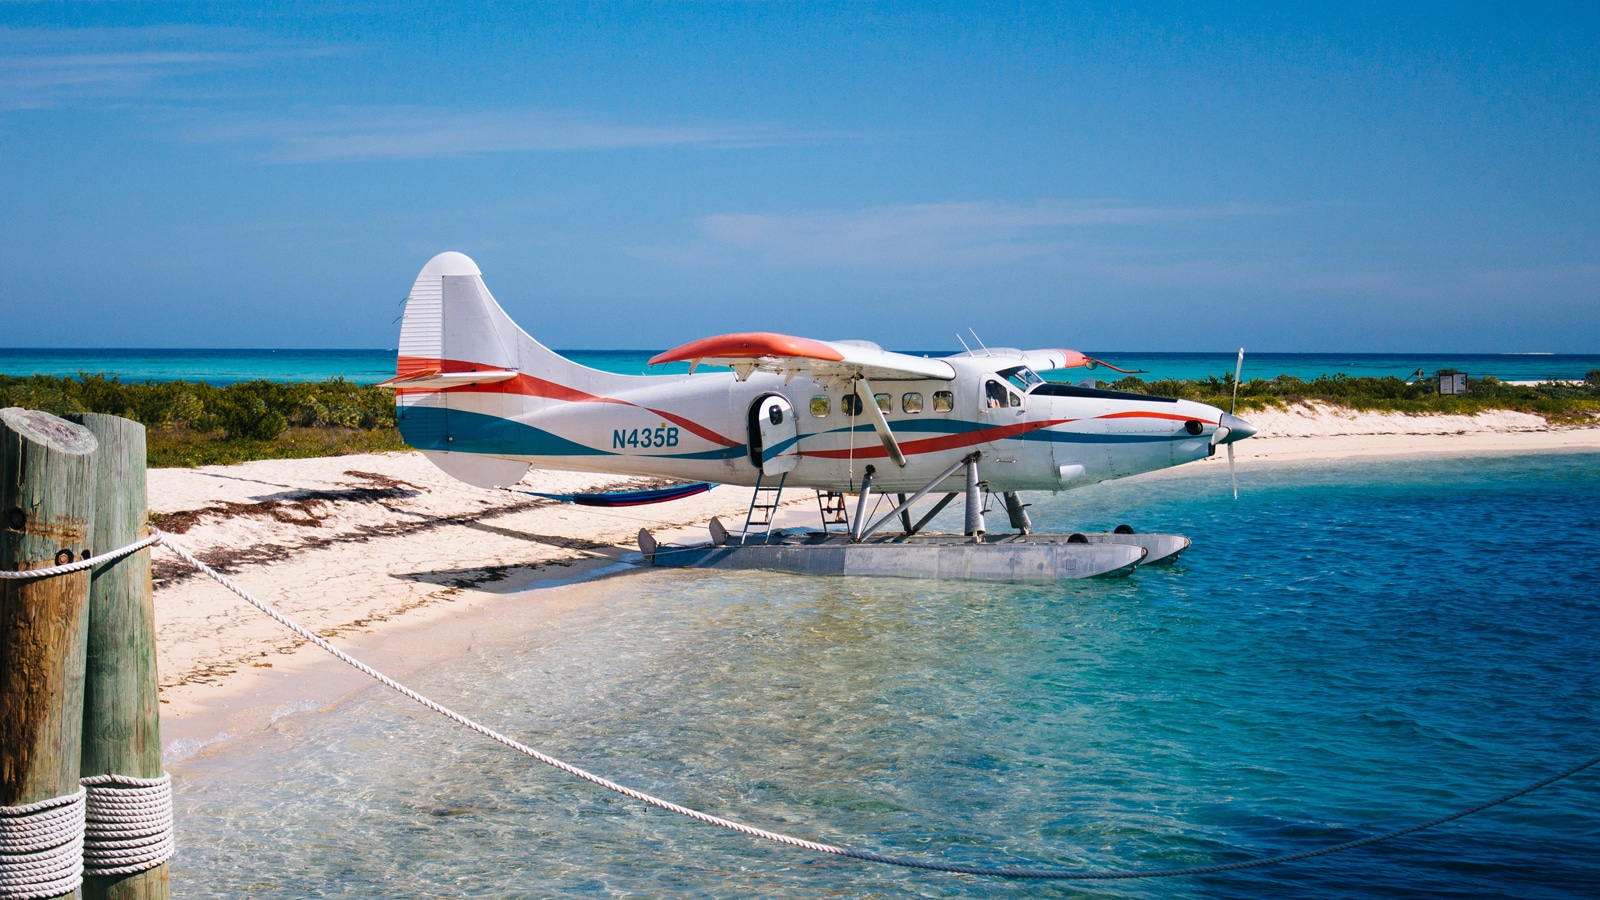 Seaplane At Dry Tortugas National Park